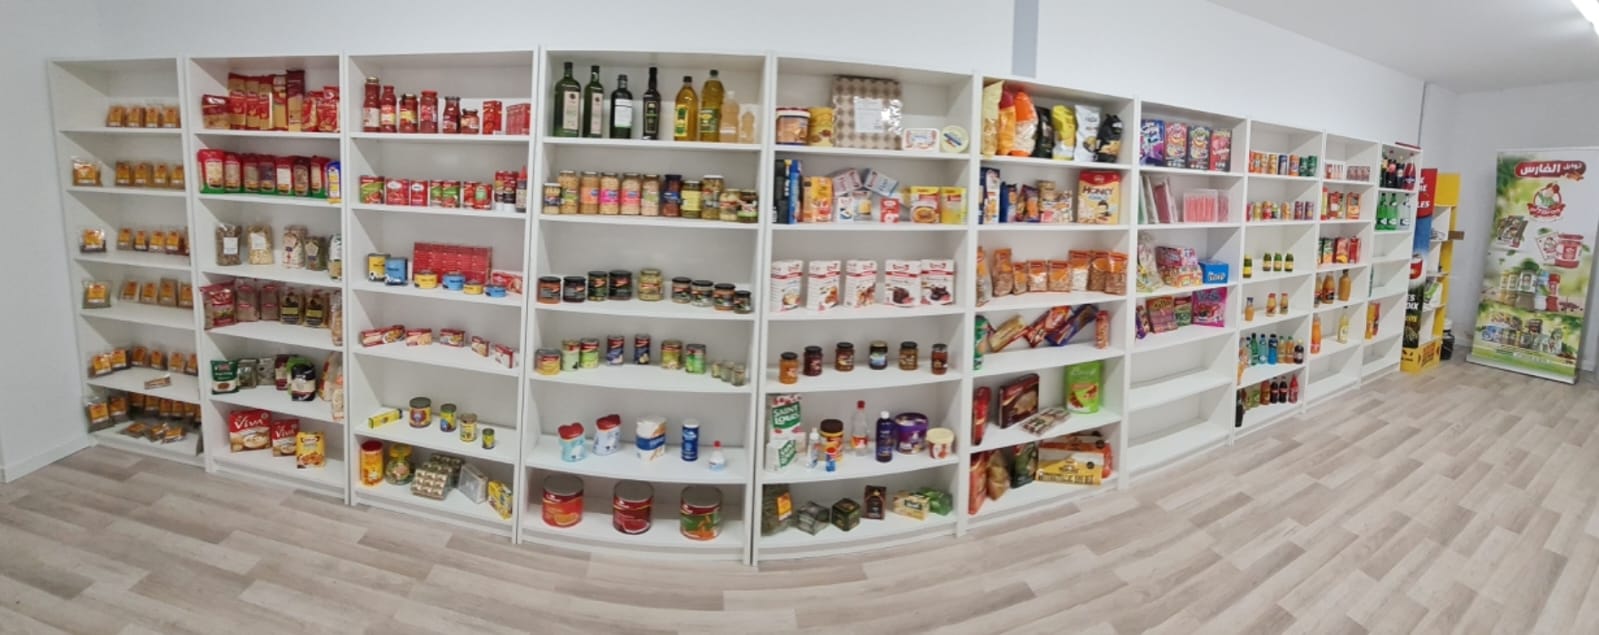 Show-room alimentaire & dph